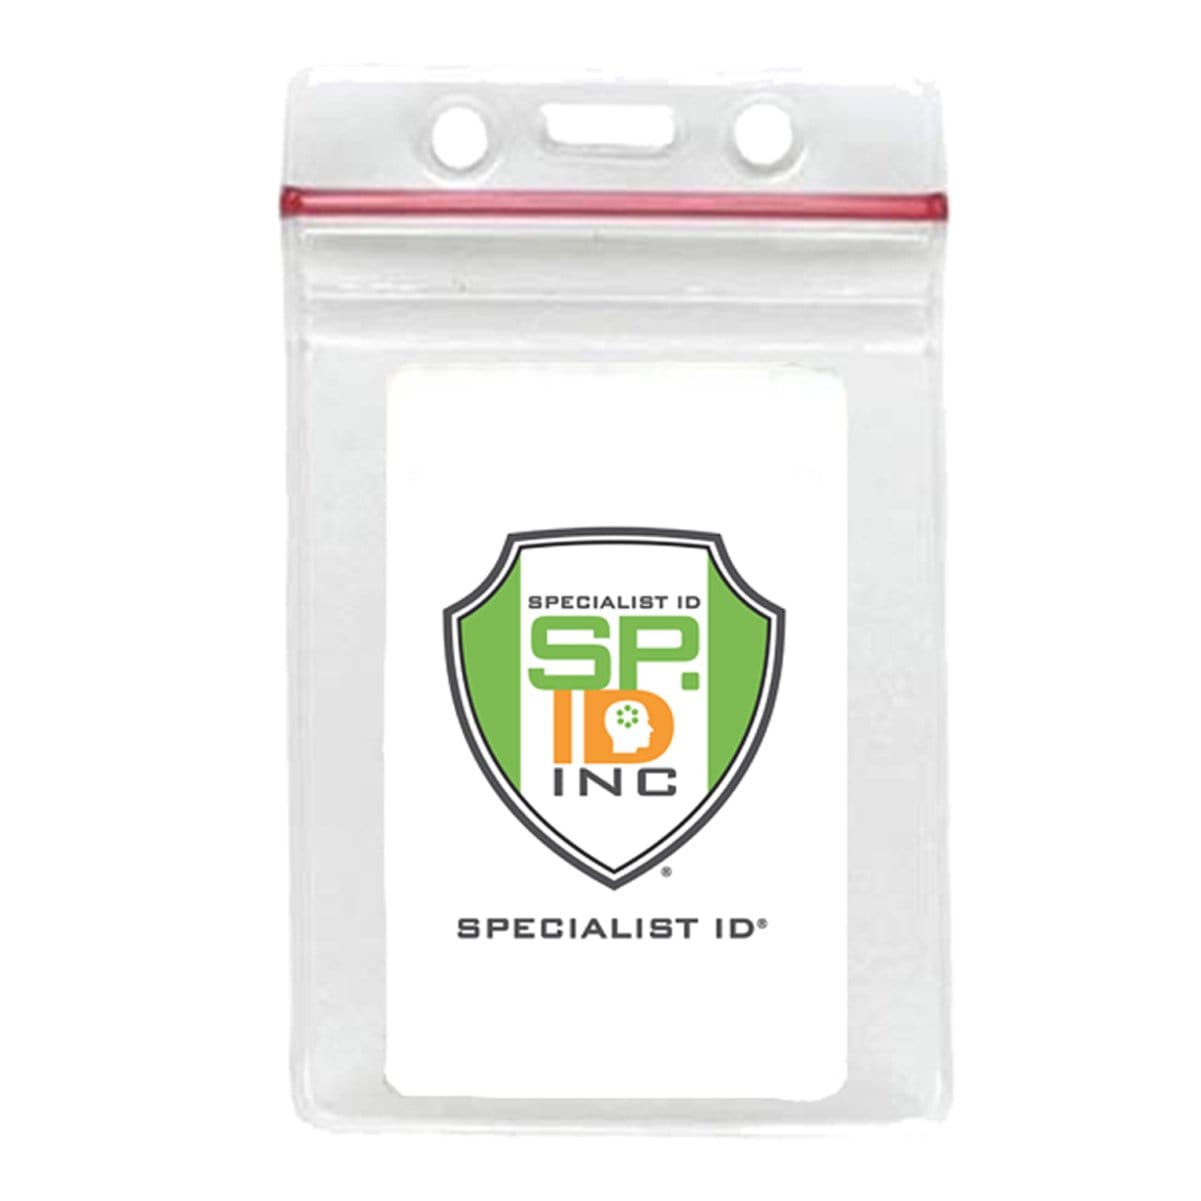 Clear Plastic Card Holder With Zip Lock Isolated On White Background  Realistic Vector Mockup Vertical Vinyl Badge Sleeve Envelope With Hanging  Slot Template Stock Illustration - Download Image Now - iStock